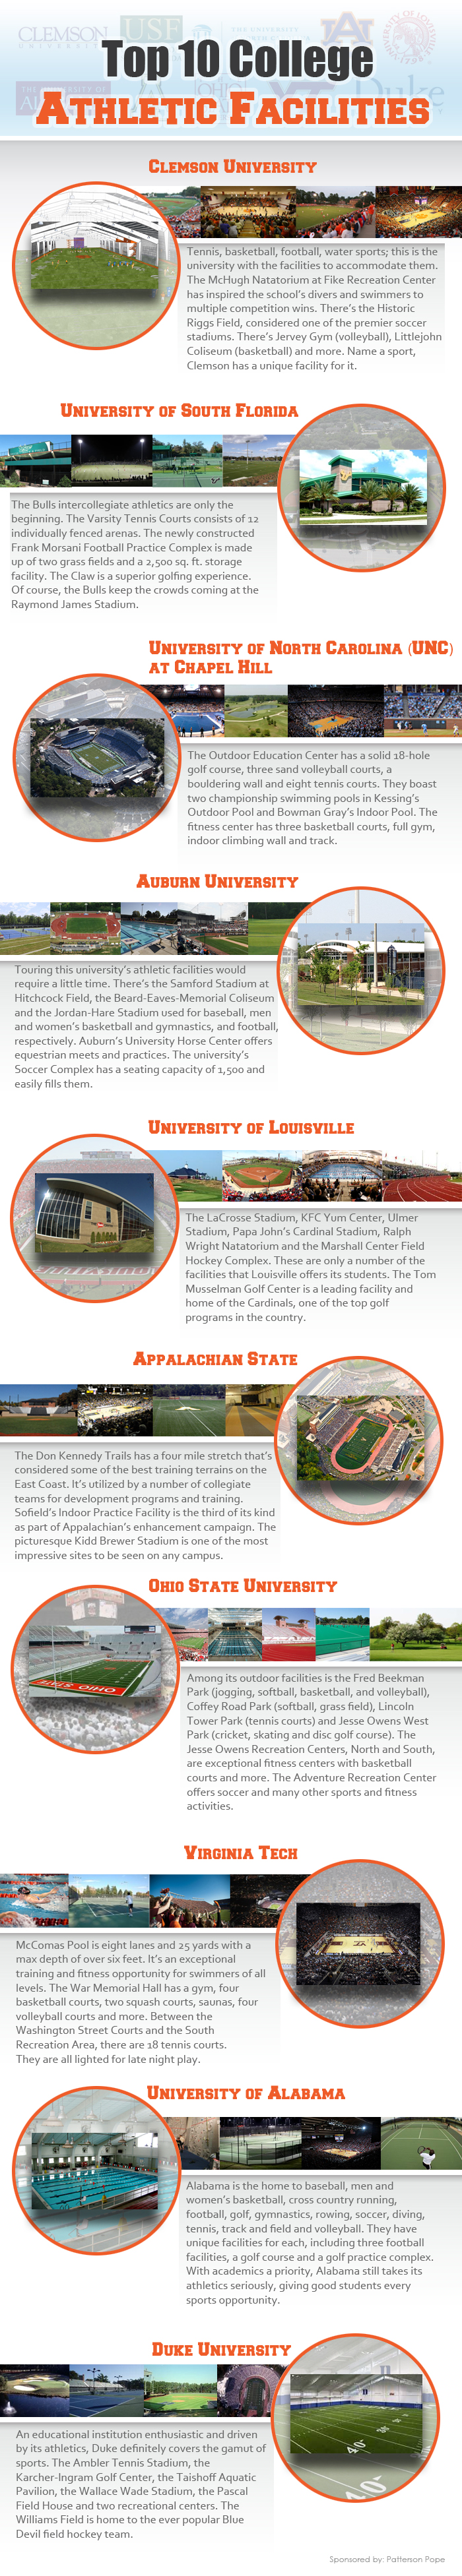 Top 10 Best College Athletic Facilities - Infographic